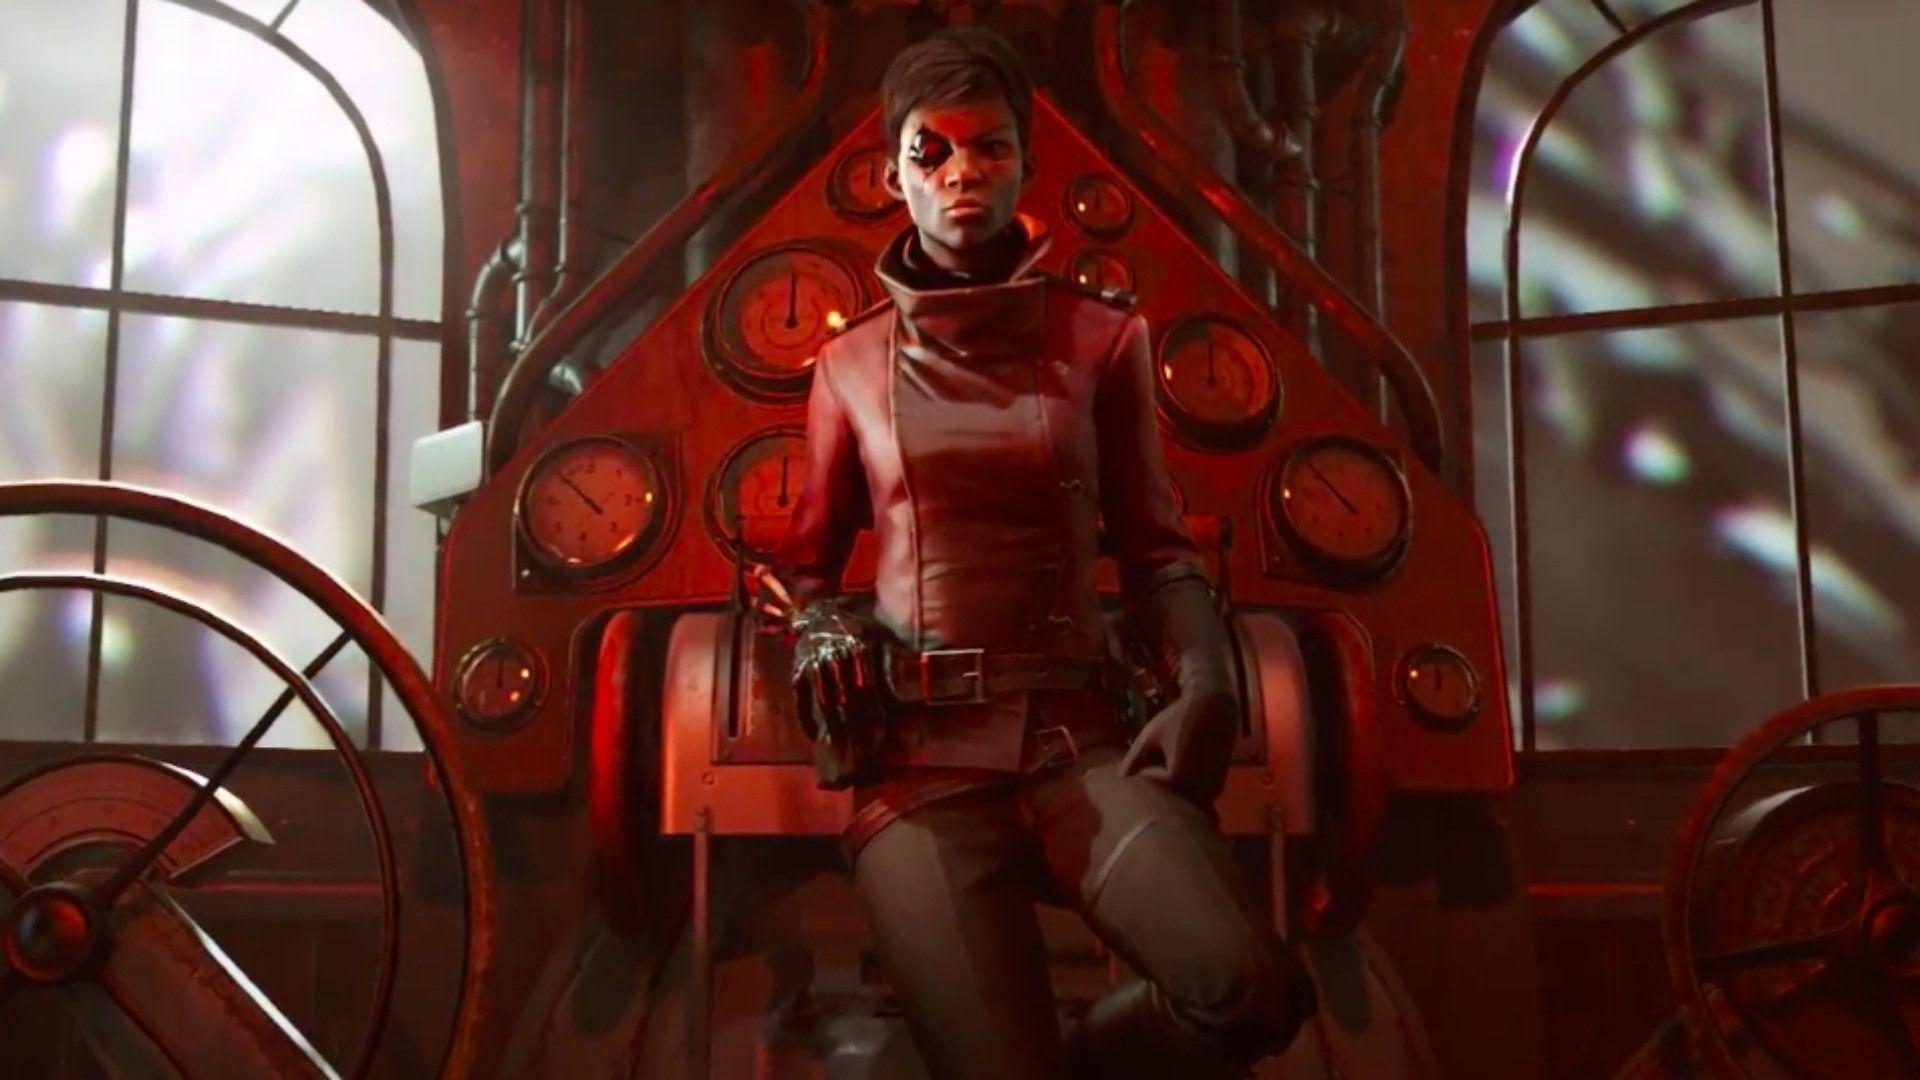 Gamescom 2017: Why Death of the Outsider is the End of Dishonored